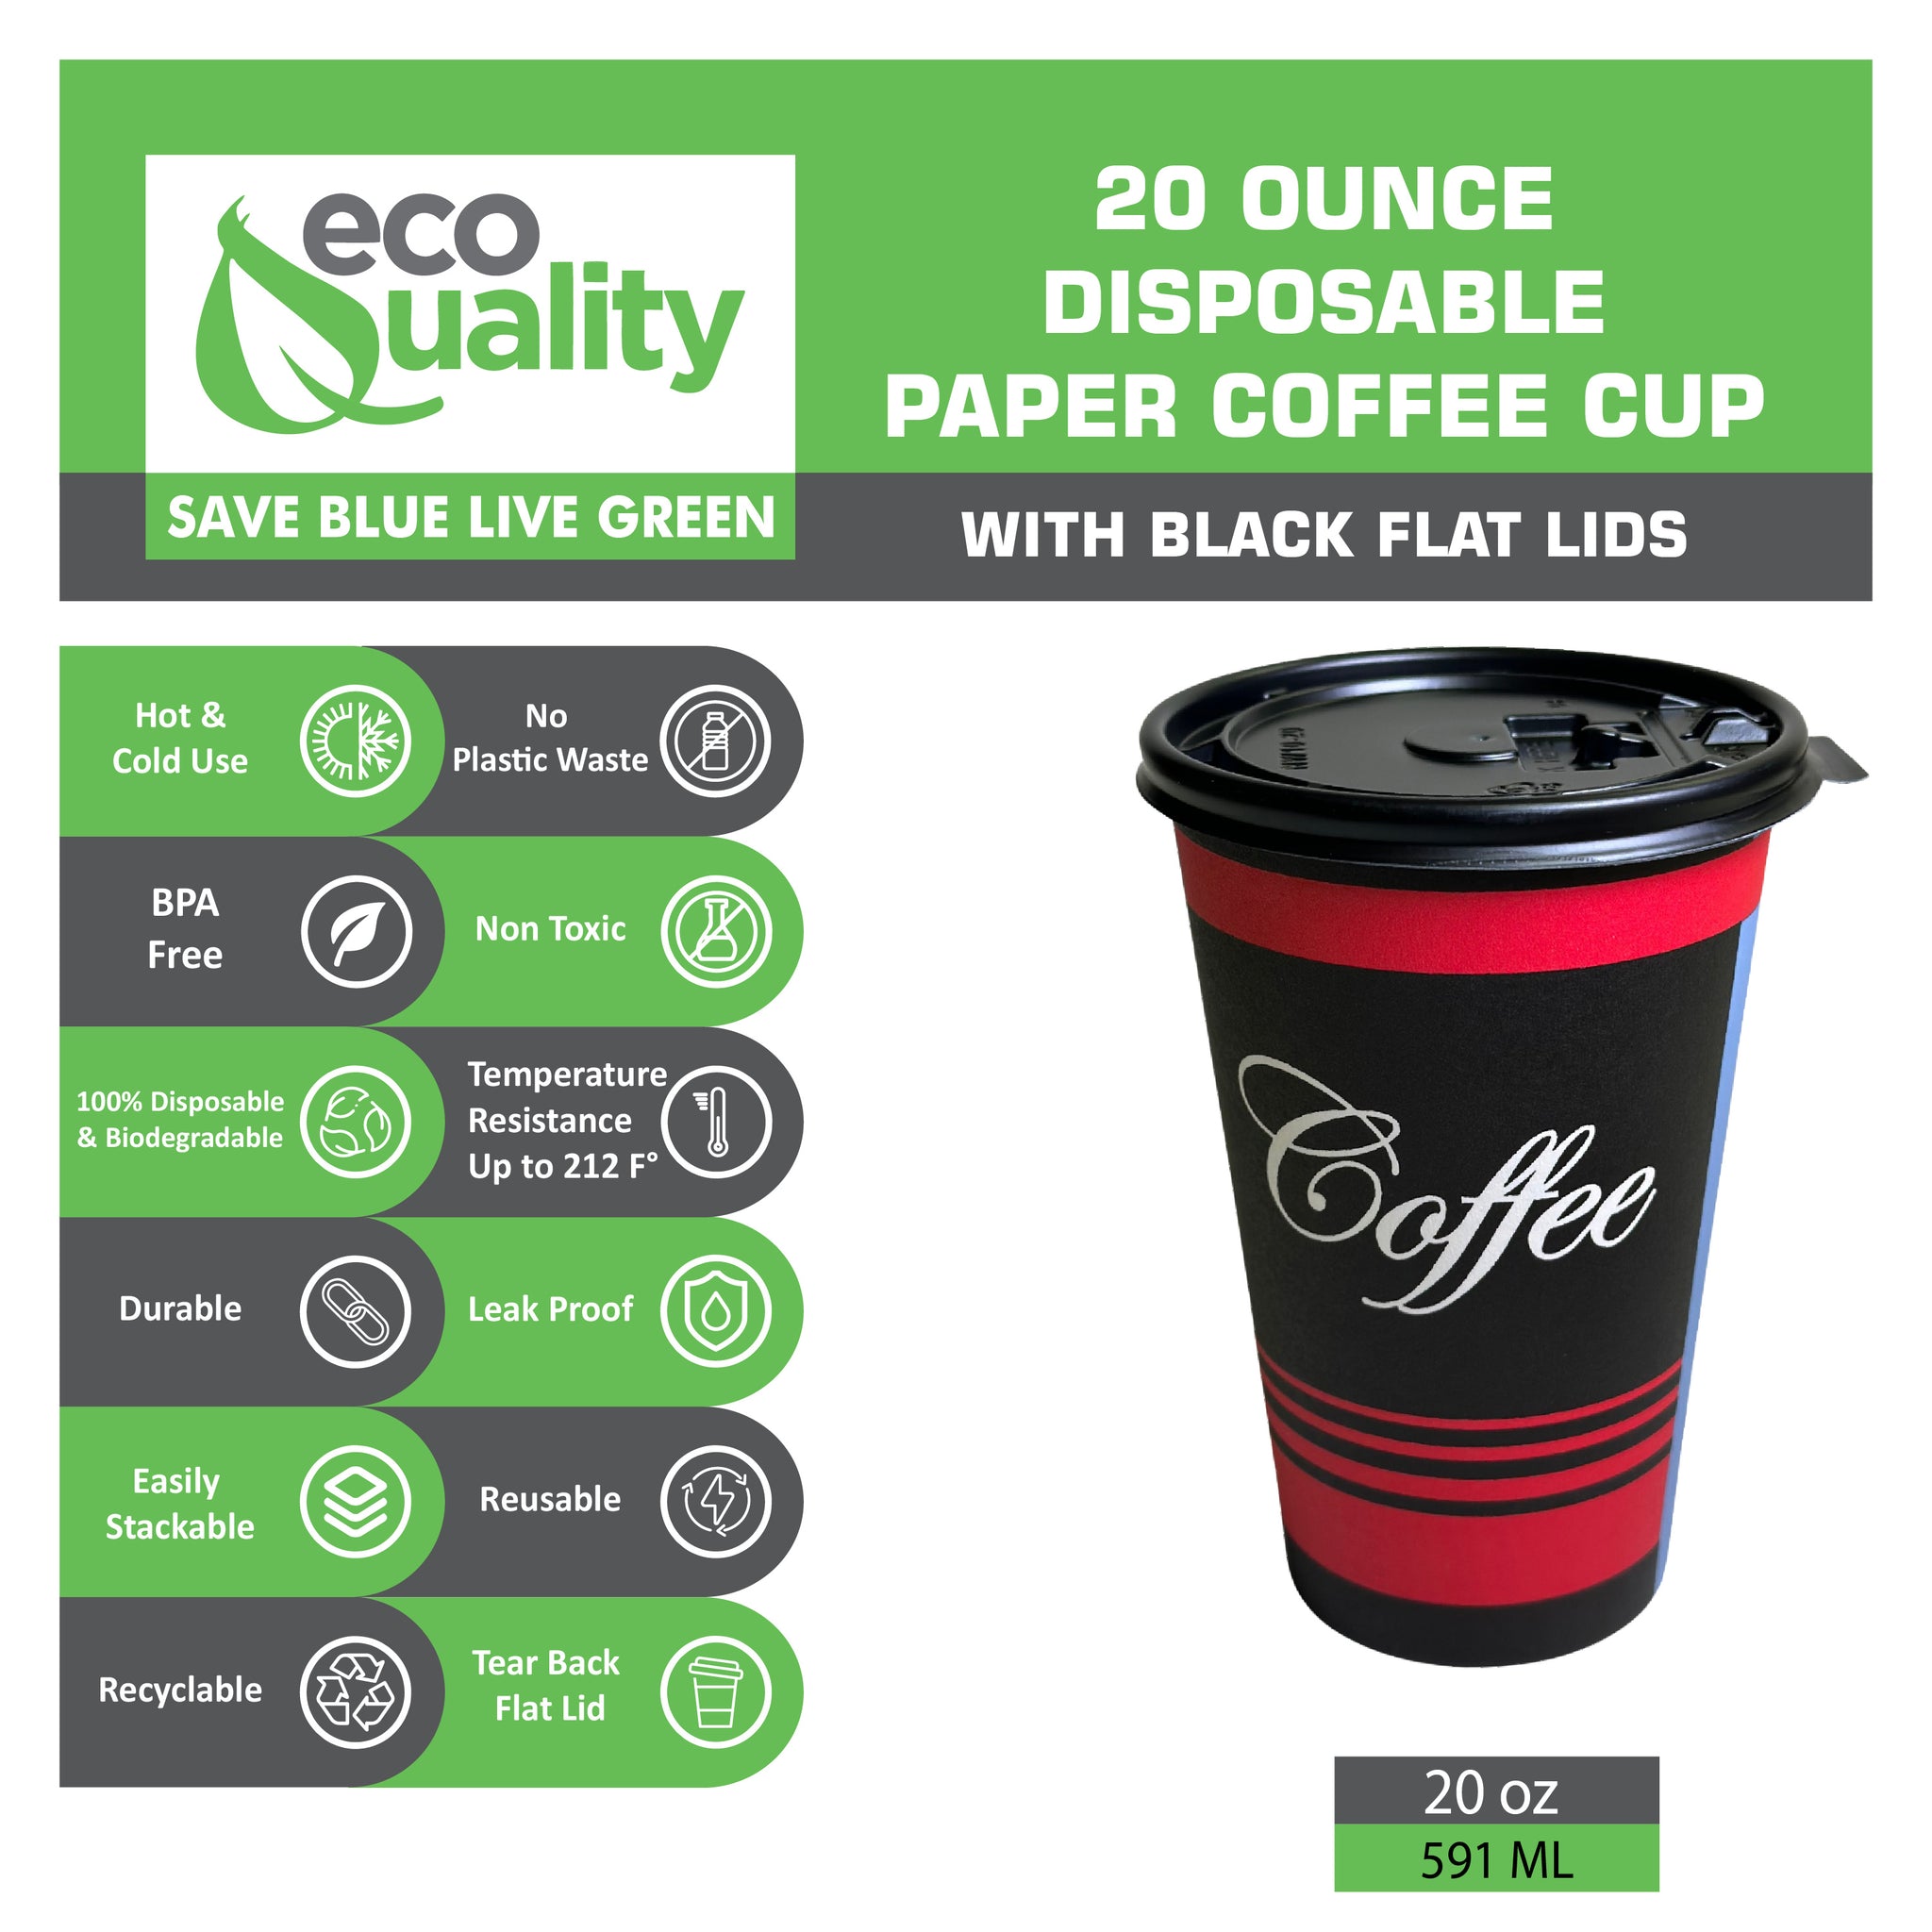 20oz Design Disposable Paper Coffee Cups with Black Flat Lids